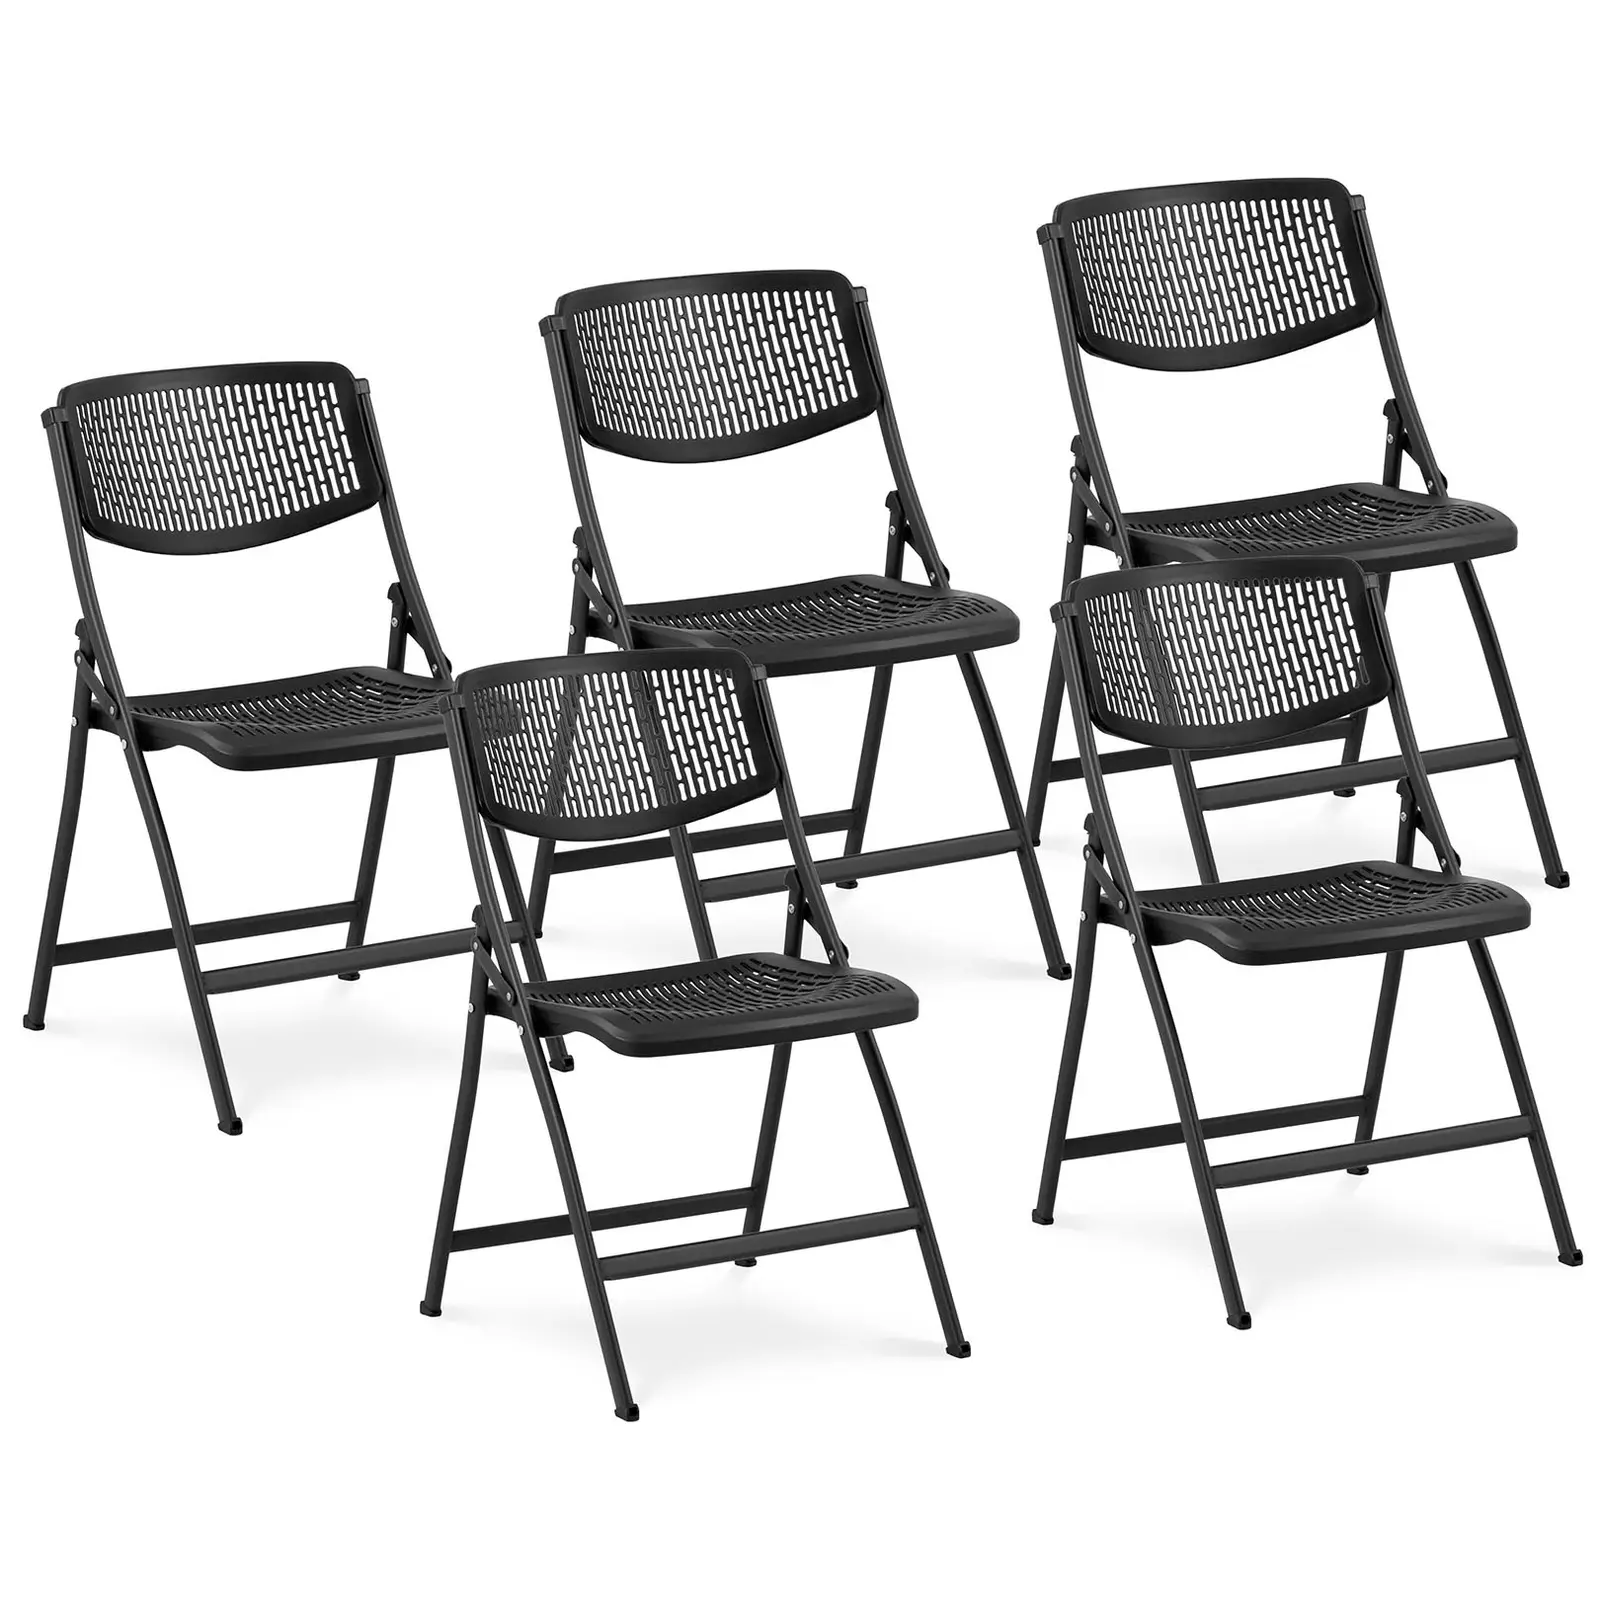 Factory second Chairs - set of 5 - up to 150 kg - seat area  430x430x440 mm - Black